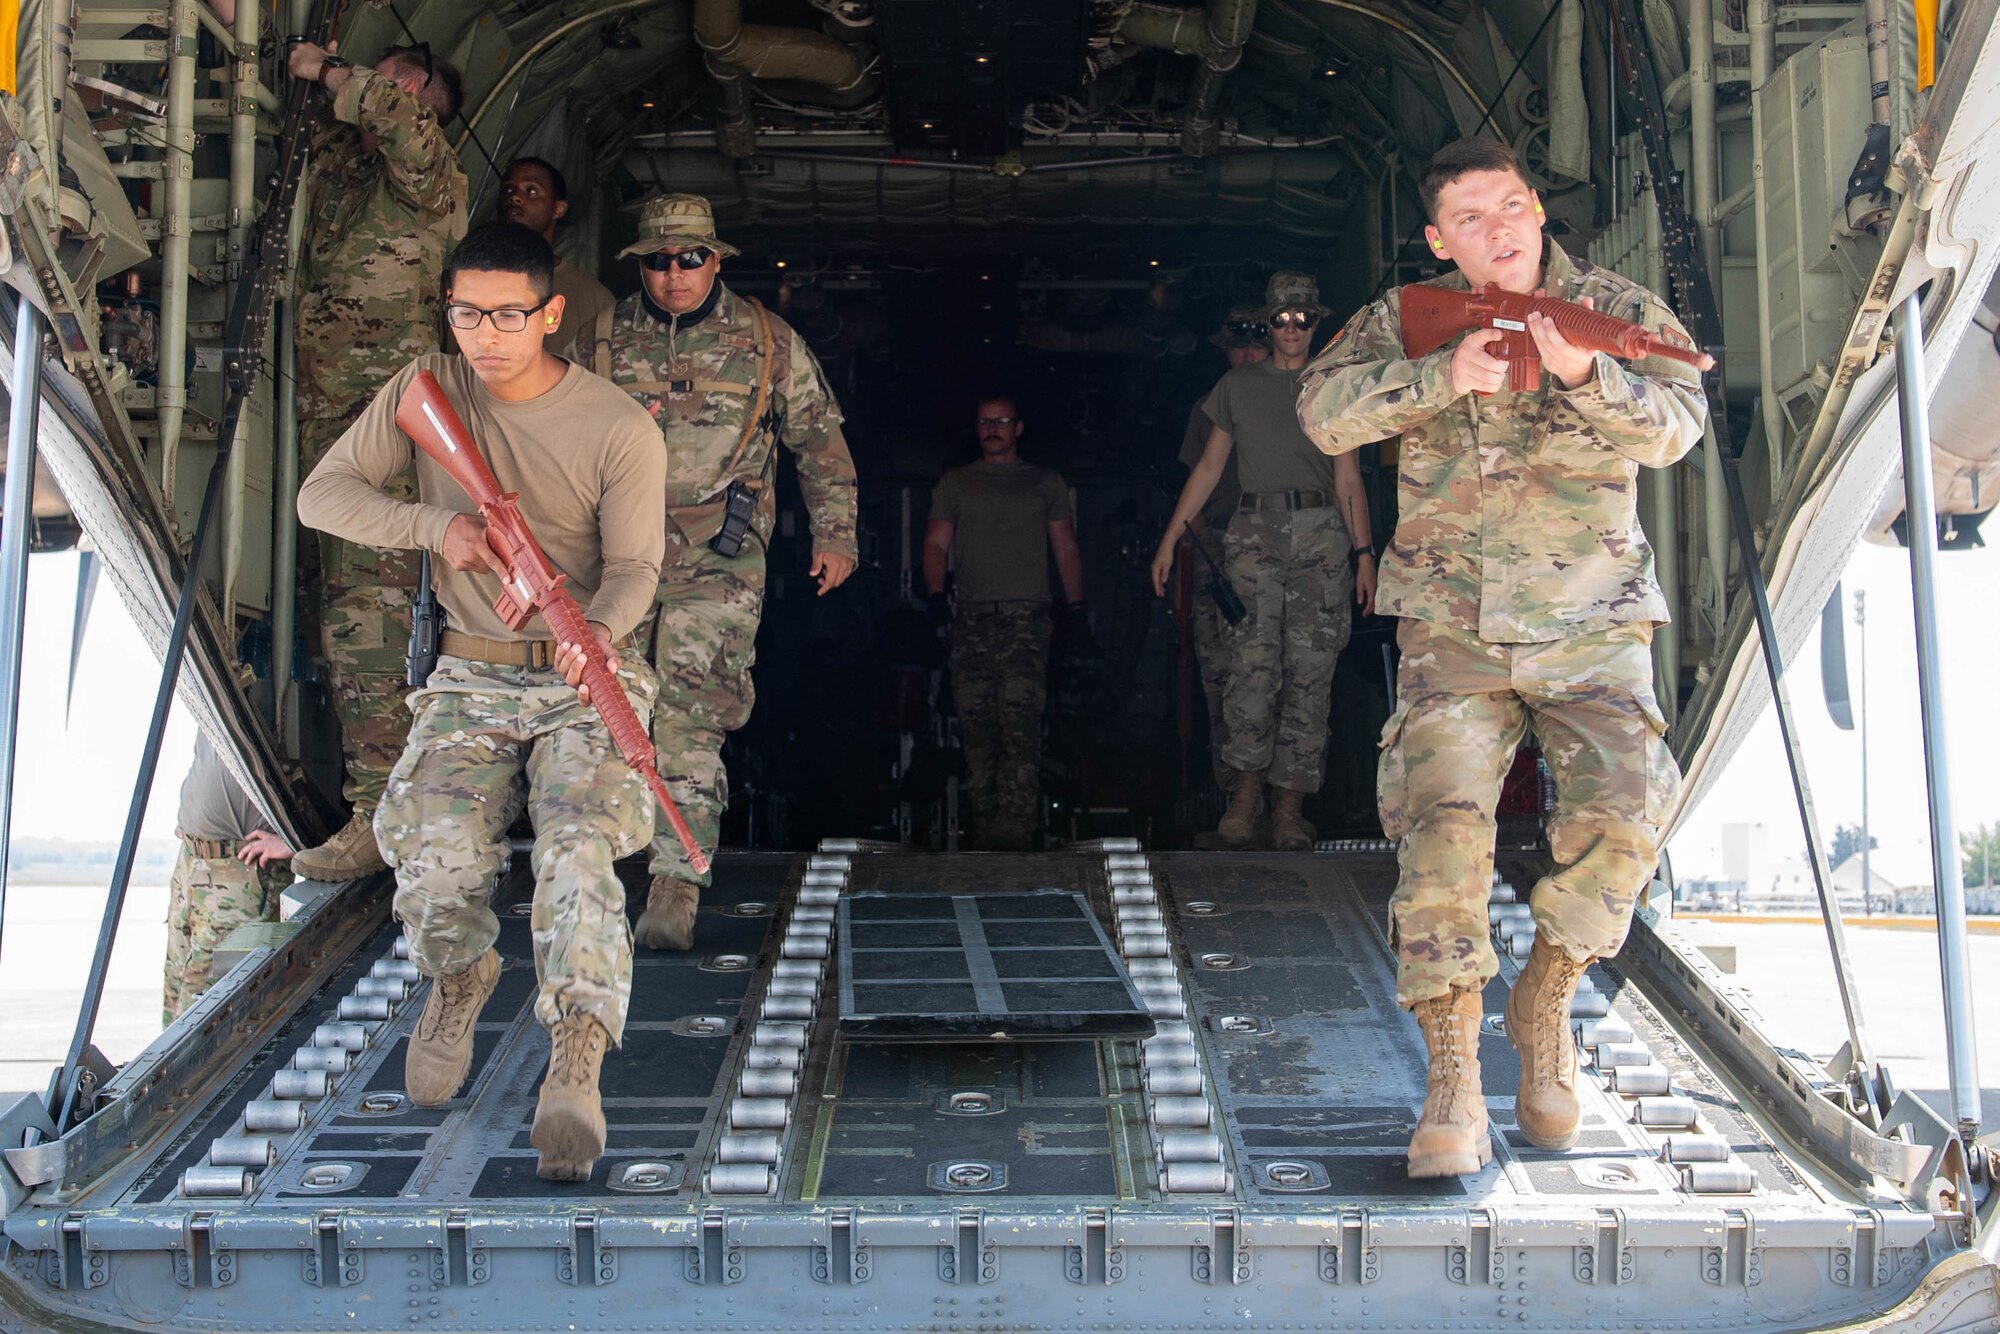 Airmen with rifles exiting aircraft.